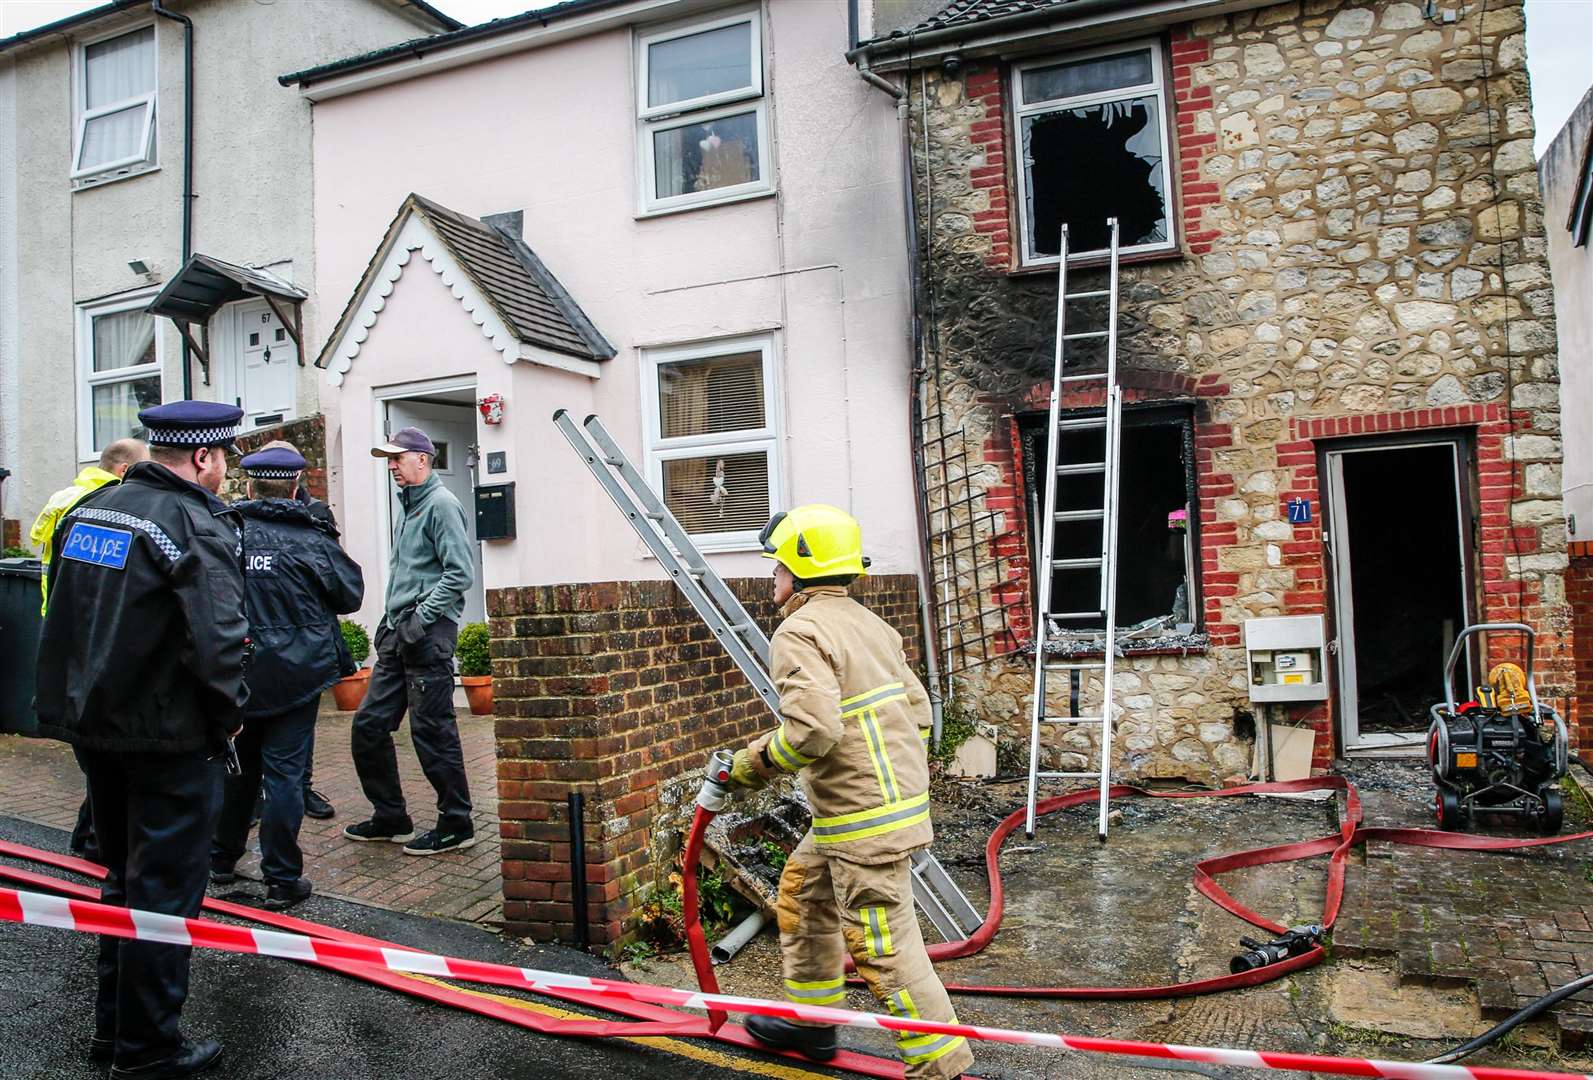 Shelley Morgan has been affected after her neighbour's property went up in flames